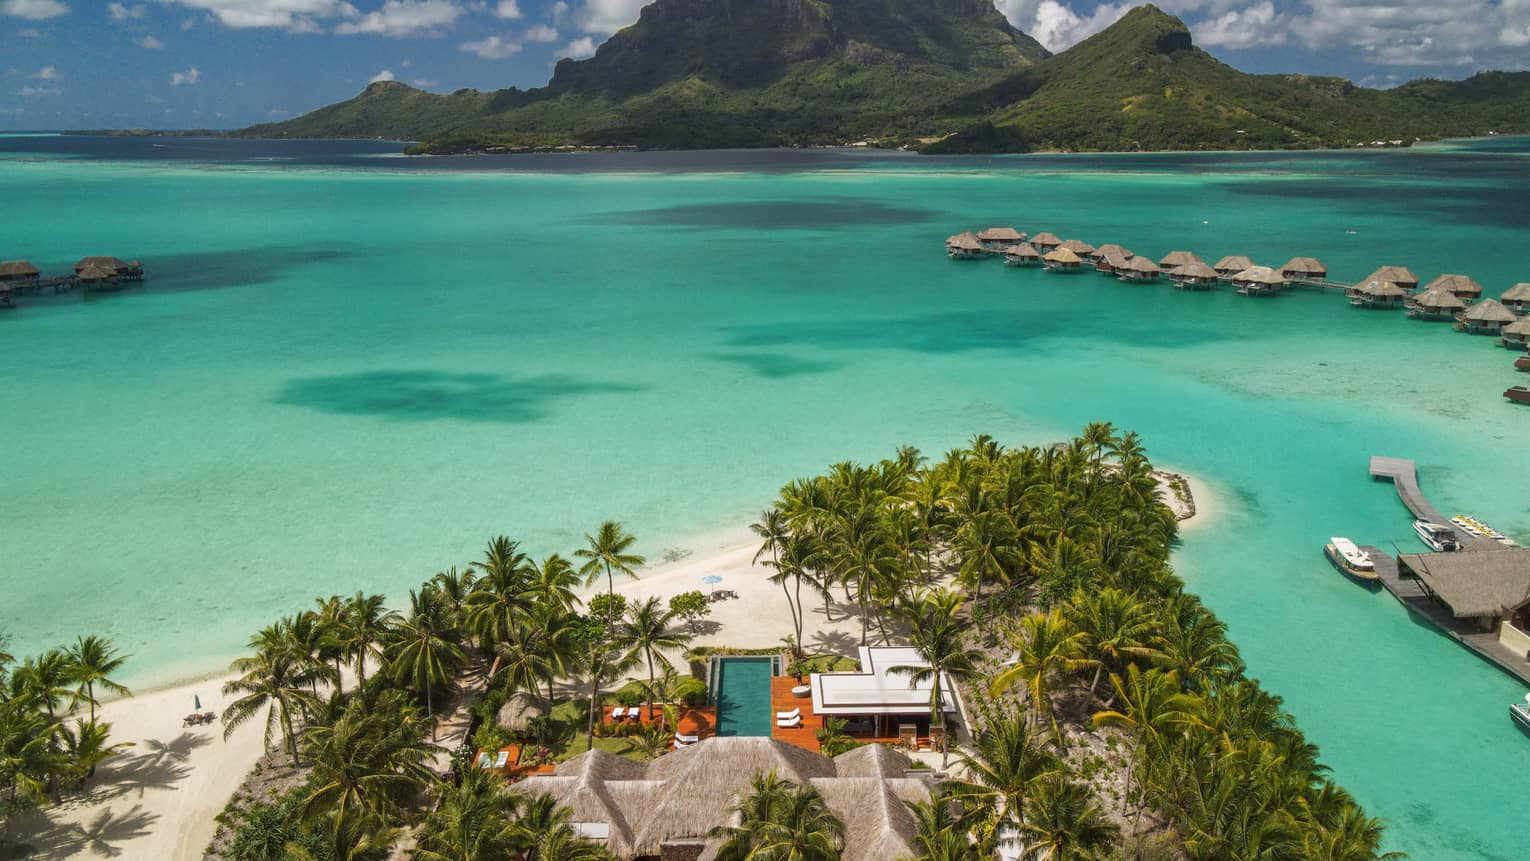 Aerial view of Bora Bora villa on edge of turquoise lagoon, looking out to overwater bungalows and mountains